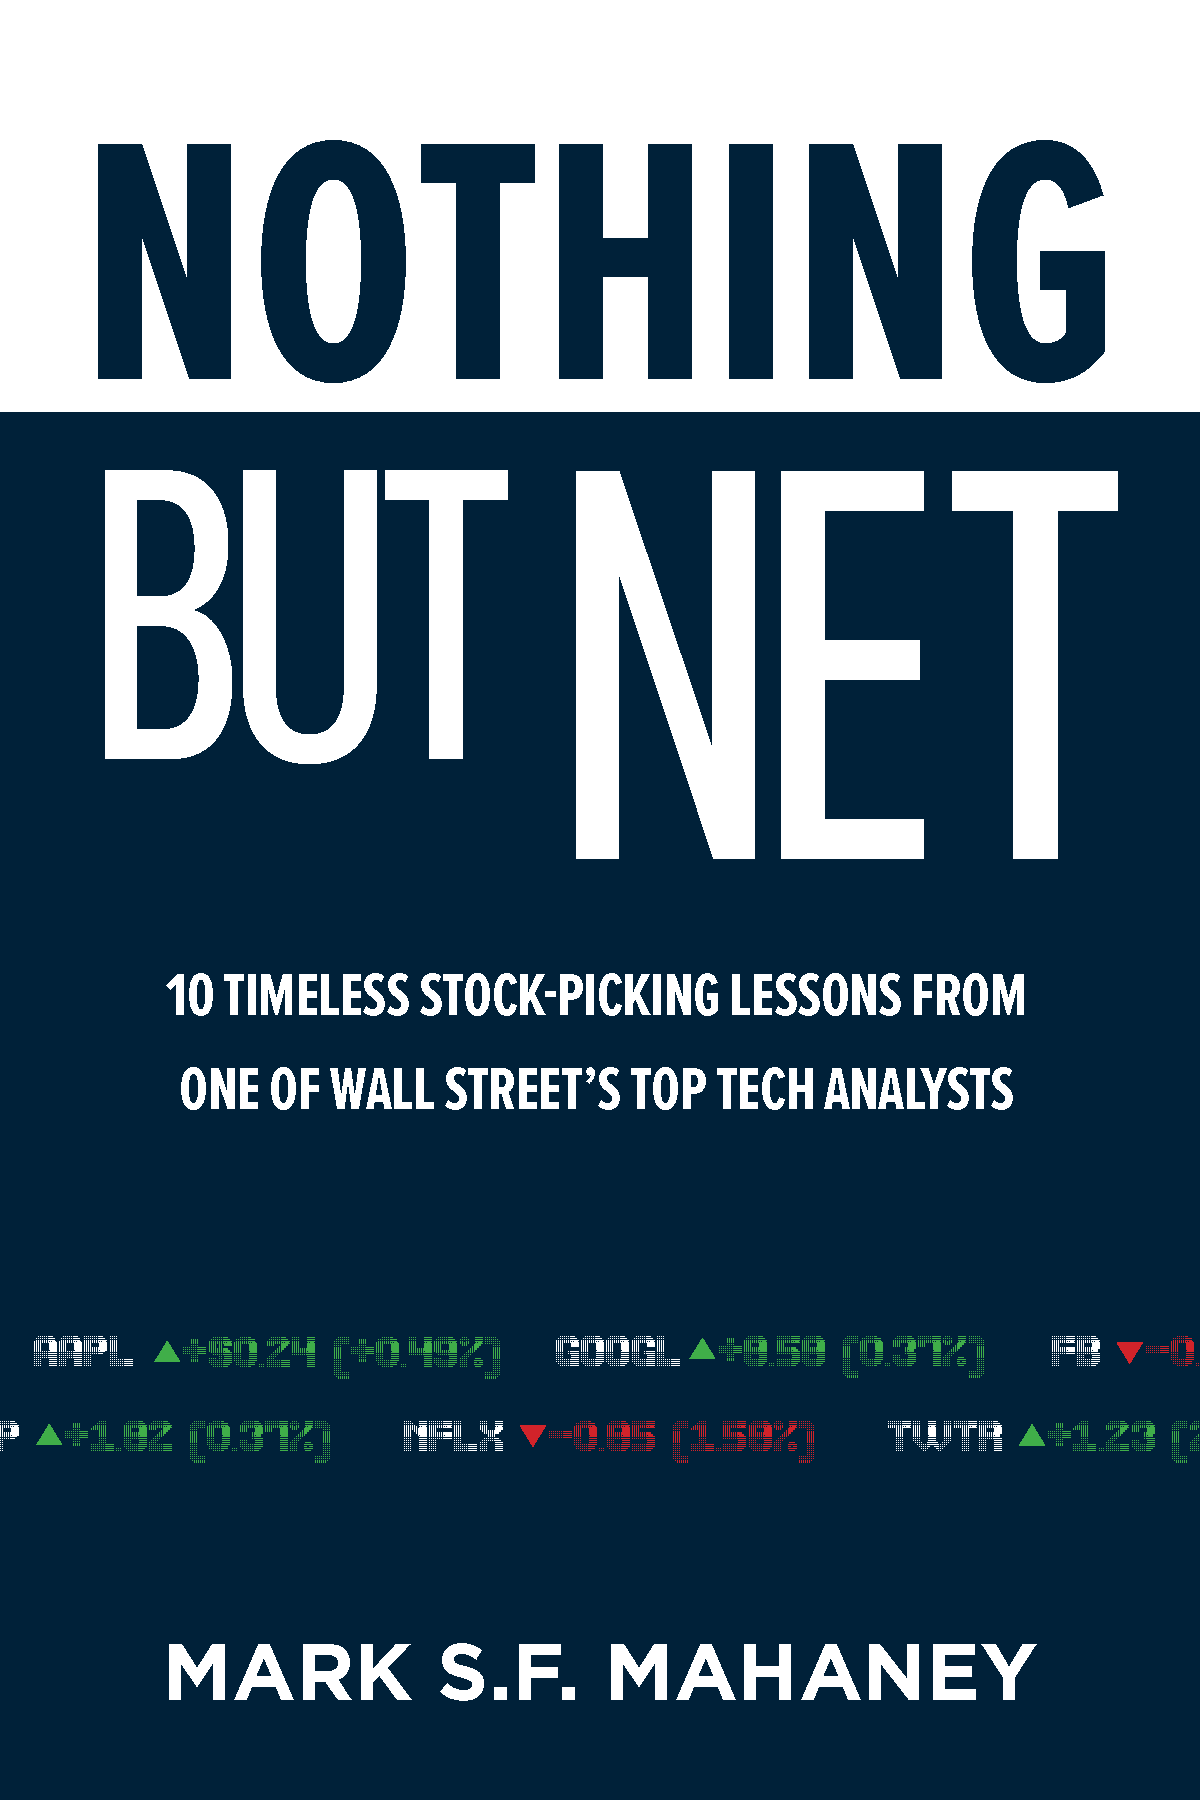 Cover for book titled: Nothing but Net: Ten Timeless Stock-picking Lessons From One of Wall Street's Top Tech Analysts